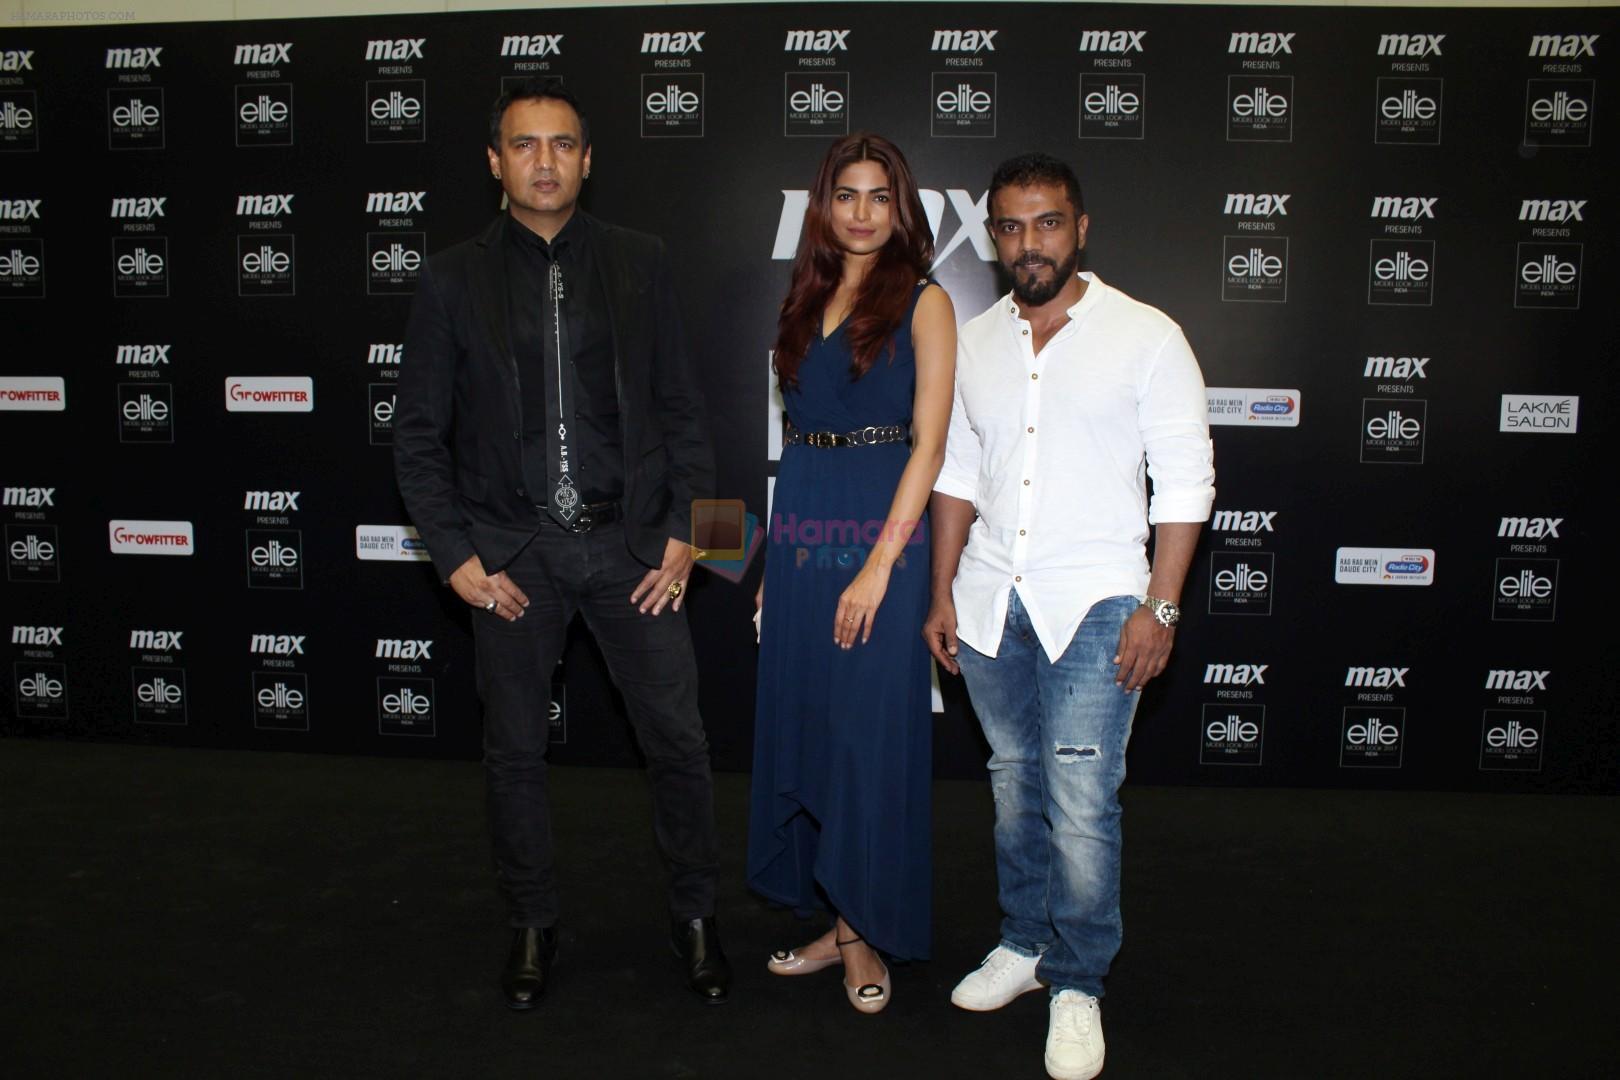 Parvathy Omanakuttan, Marc Robinson at the Auditions Of Elite Model Look India 2017 on 12th Aug 2017